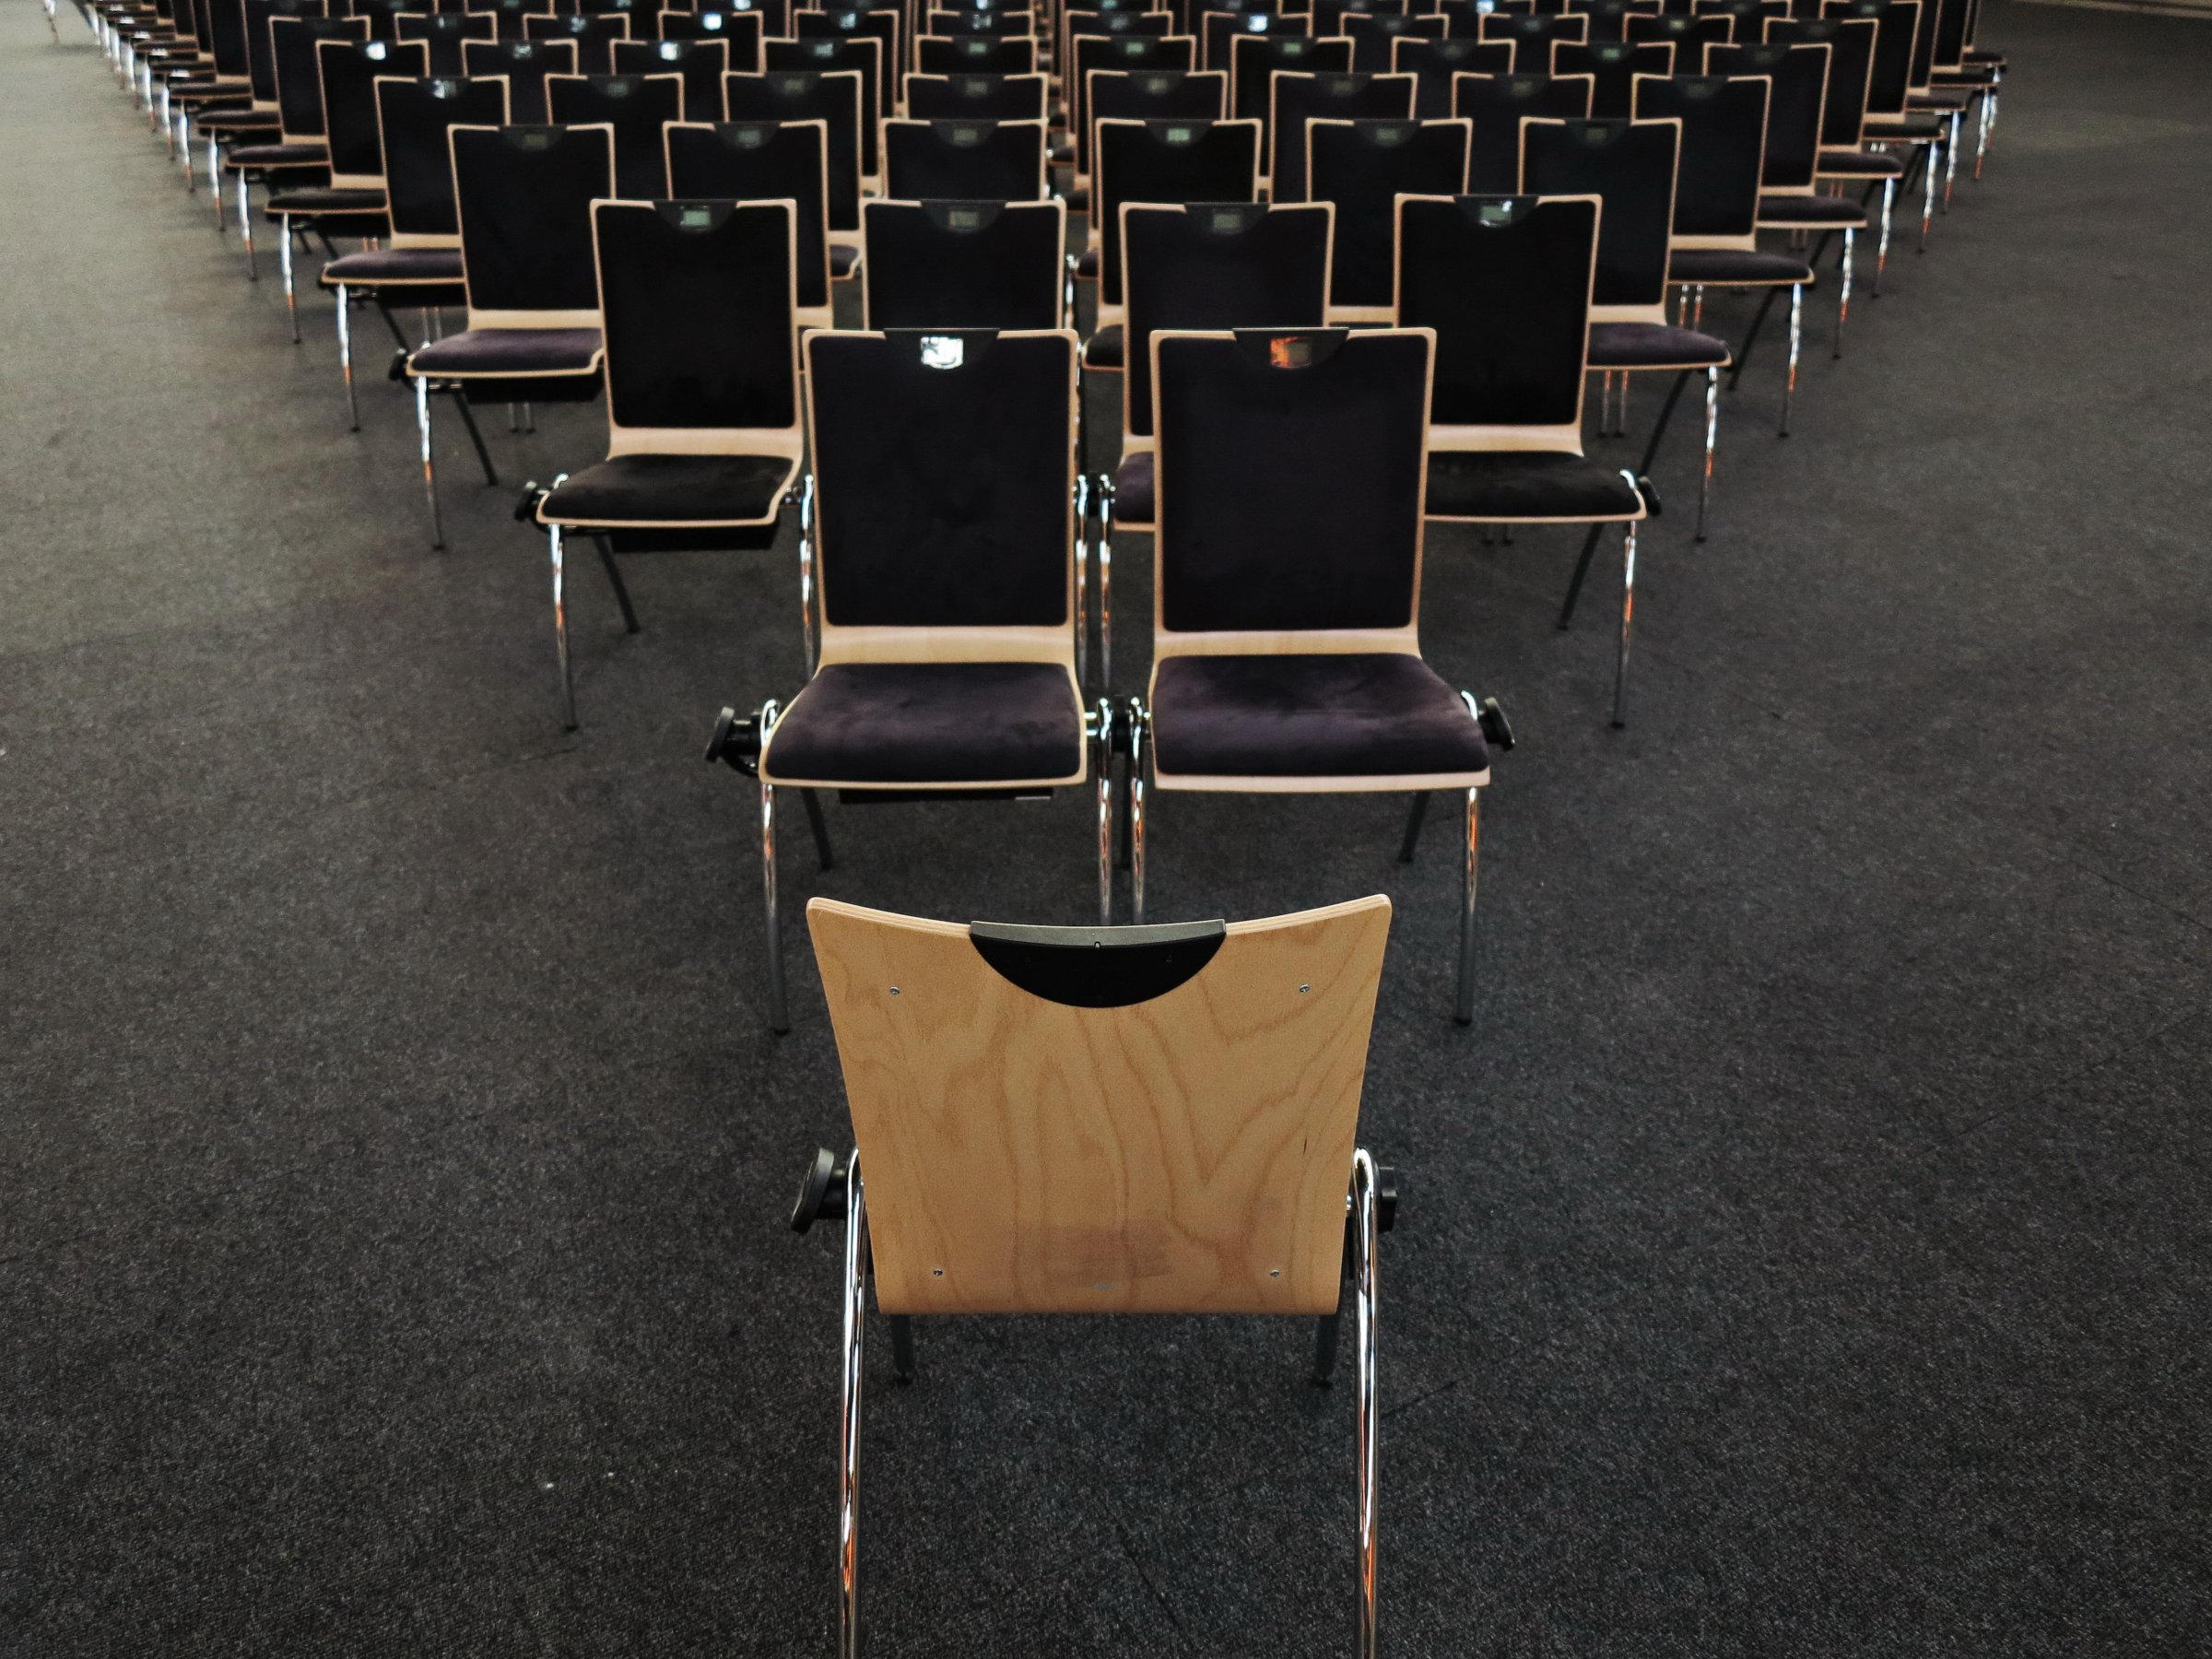 One chair facing an audience